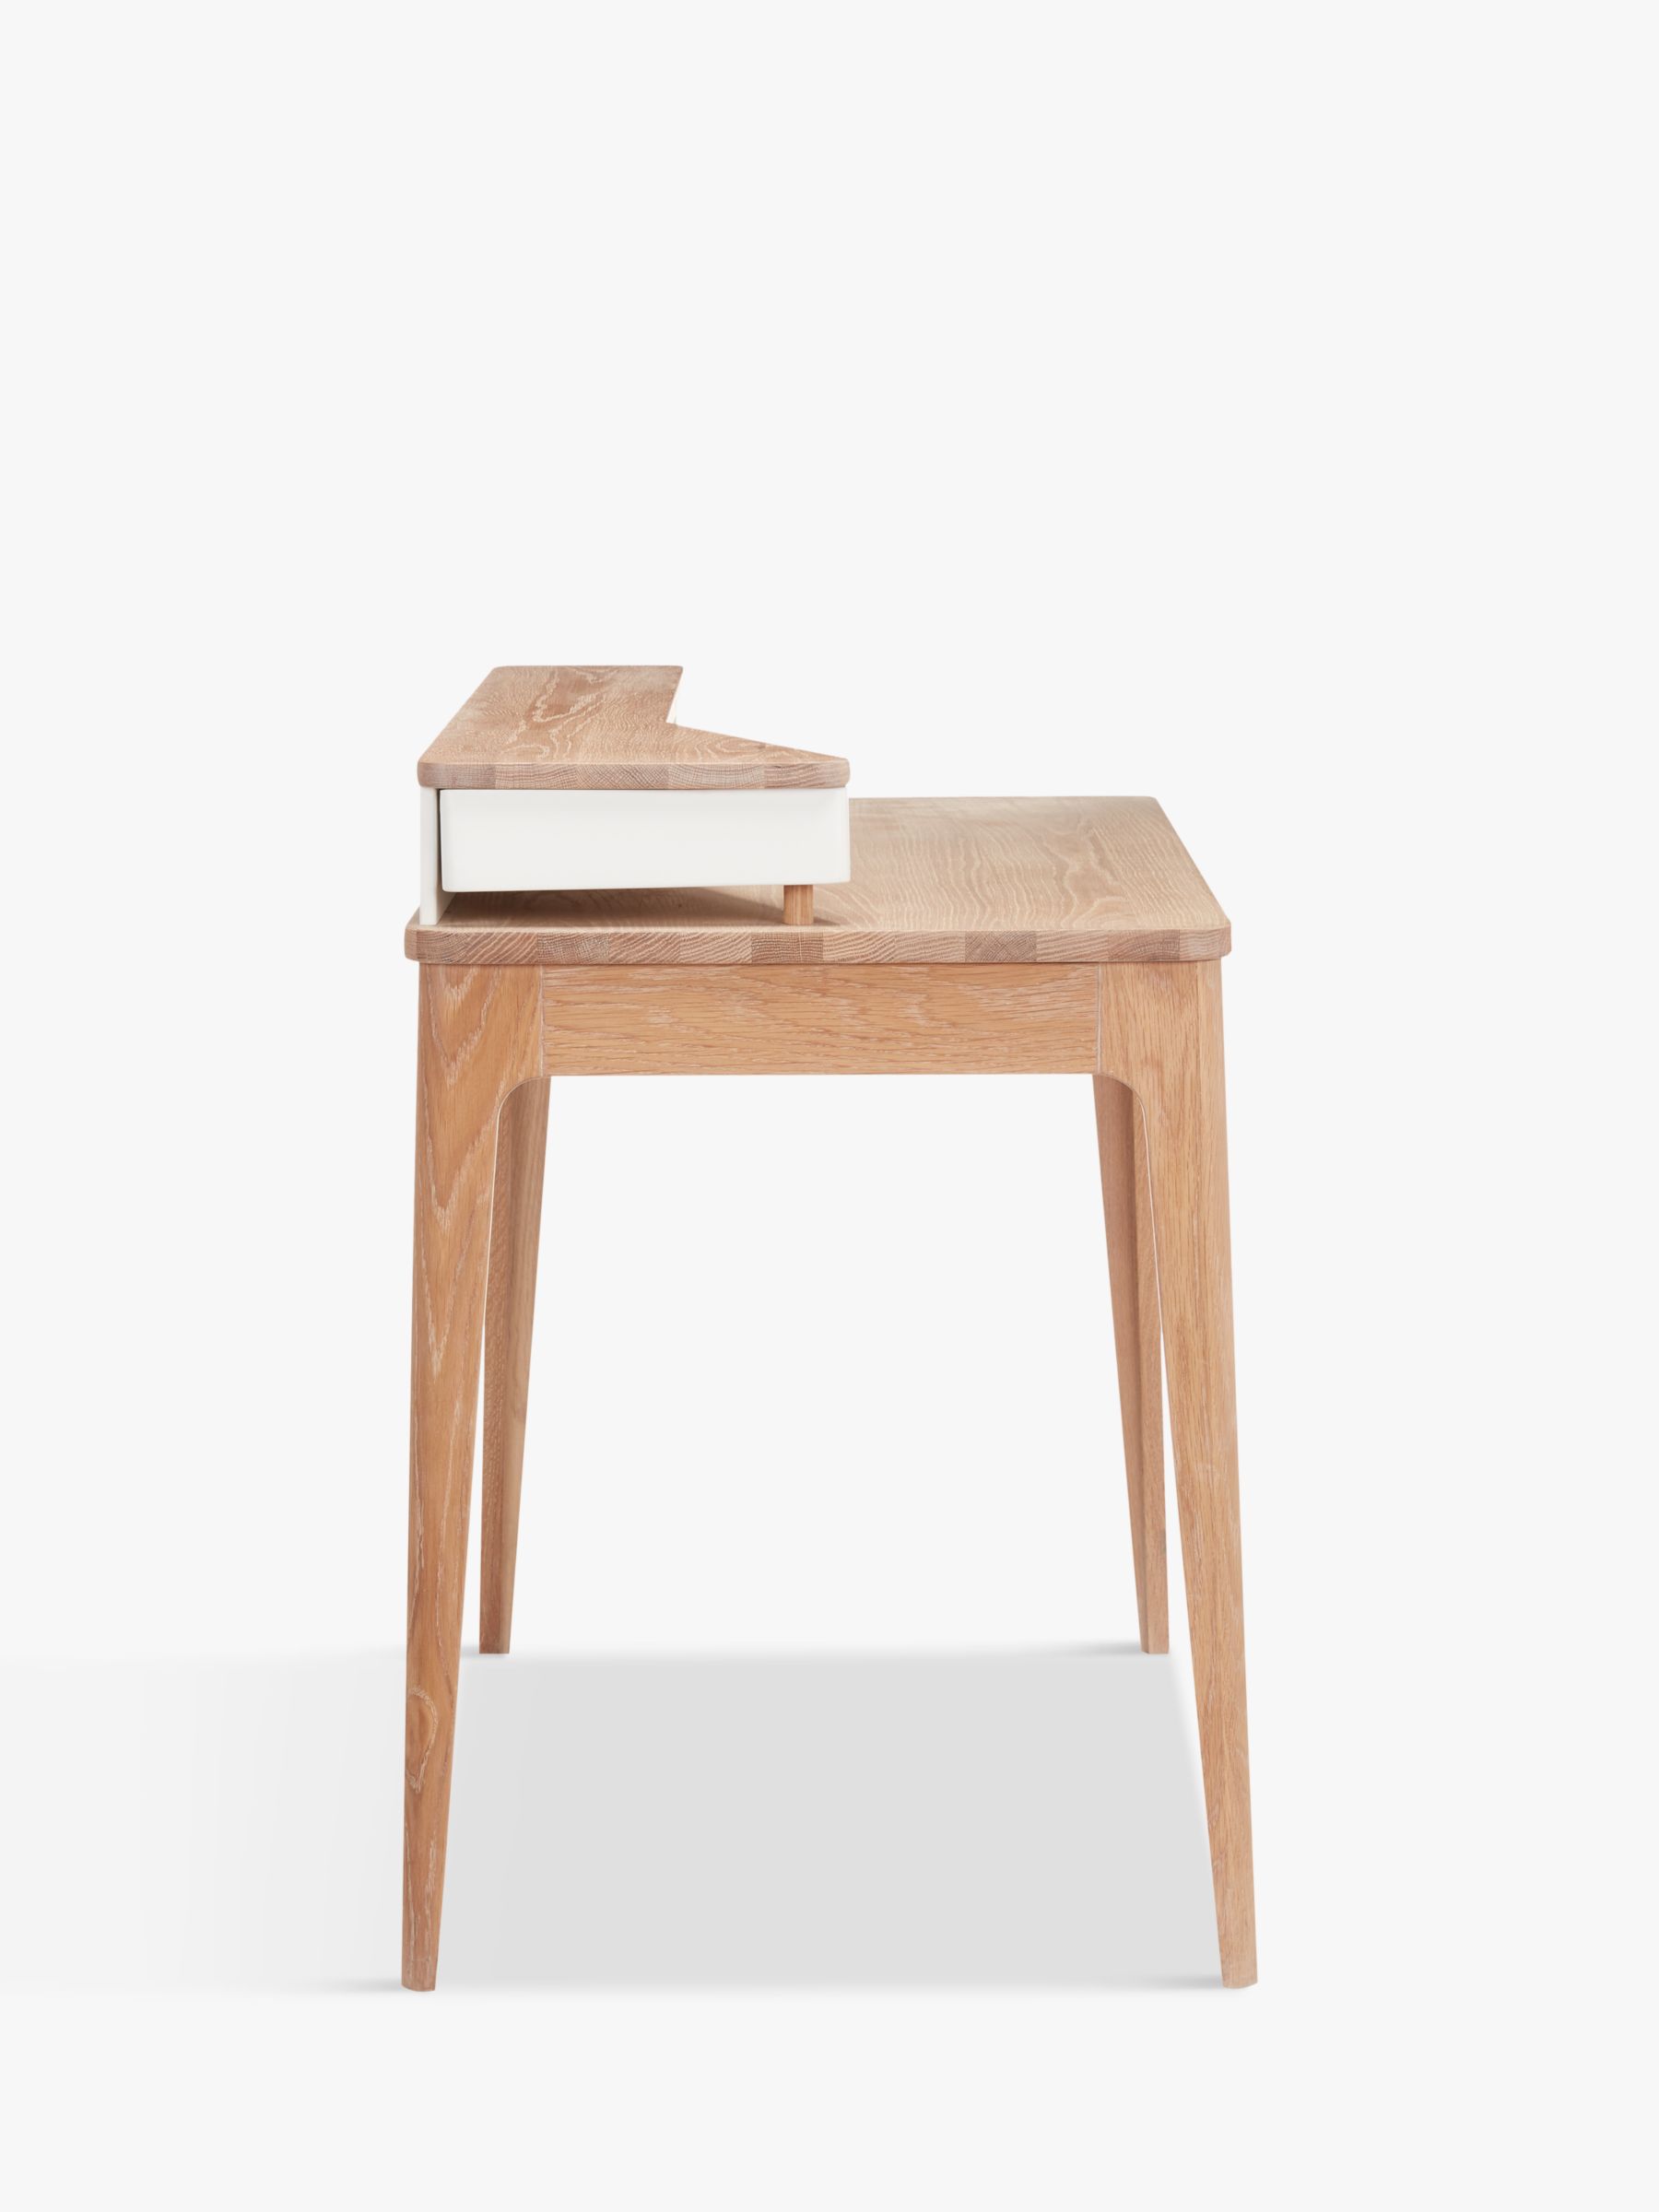 Ebbe Gehl For John Lewis Mira Office Contemporary Home, 59% OFF